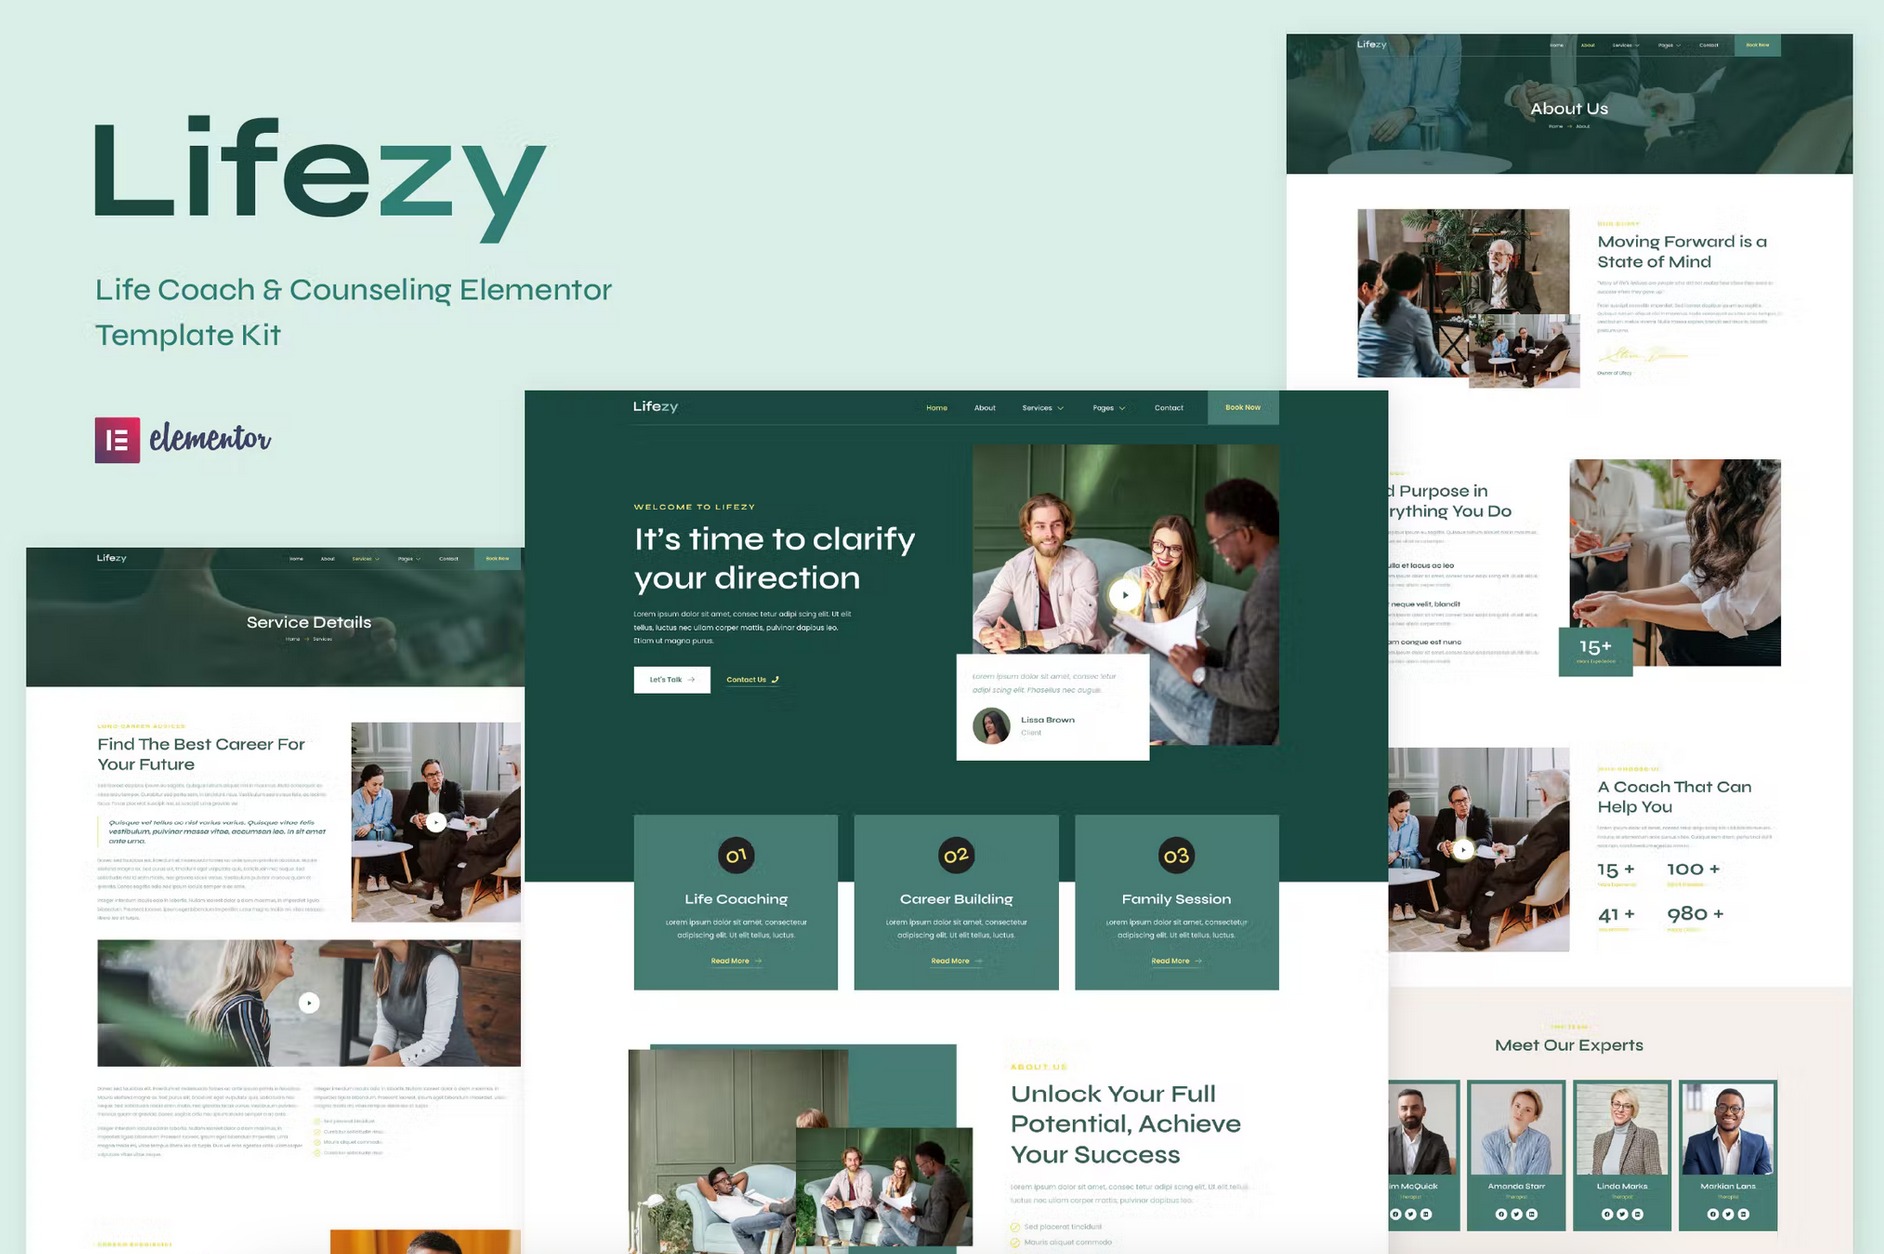 Lifezy - Life Coach - Counseling Elementor Template Kit